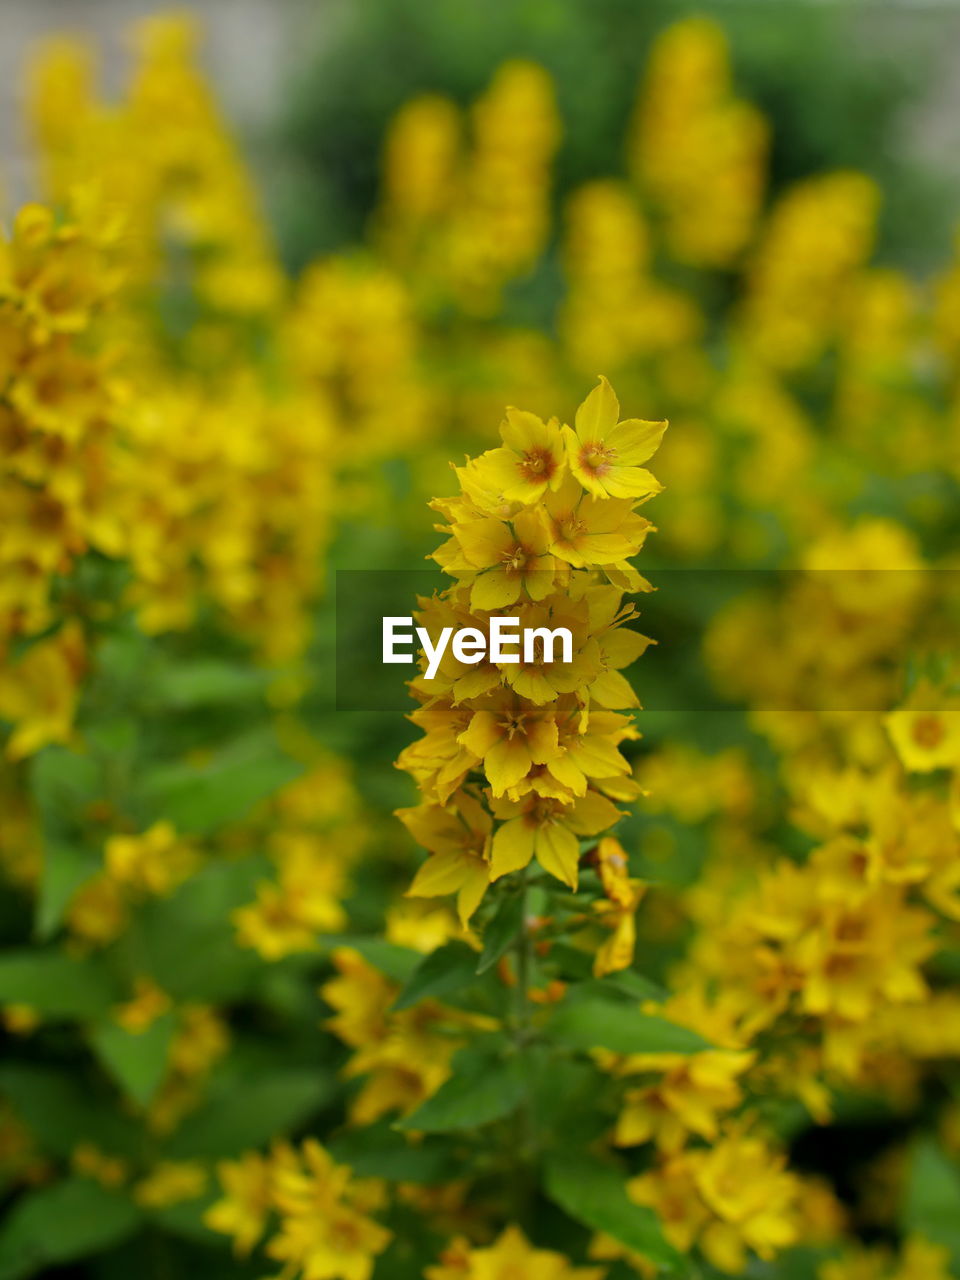 CLOSE-UP OF YELLOW FLOWERING PLANT ON LAND